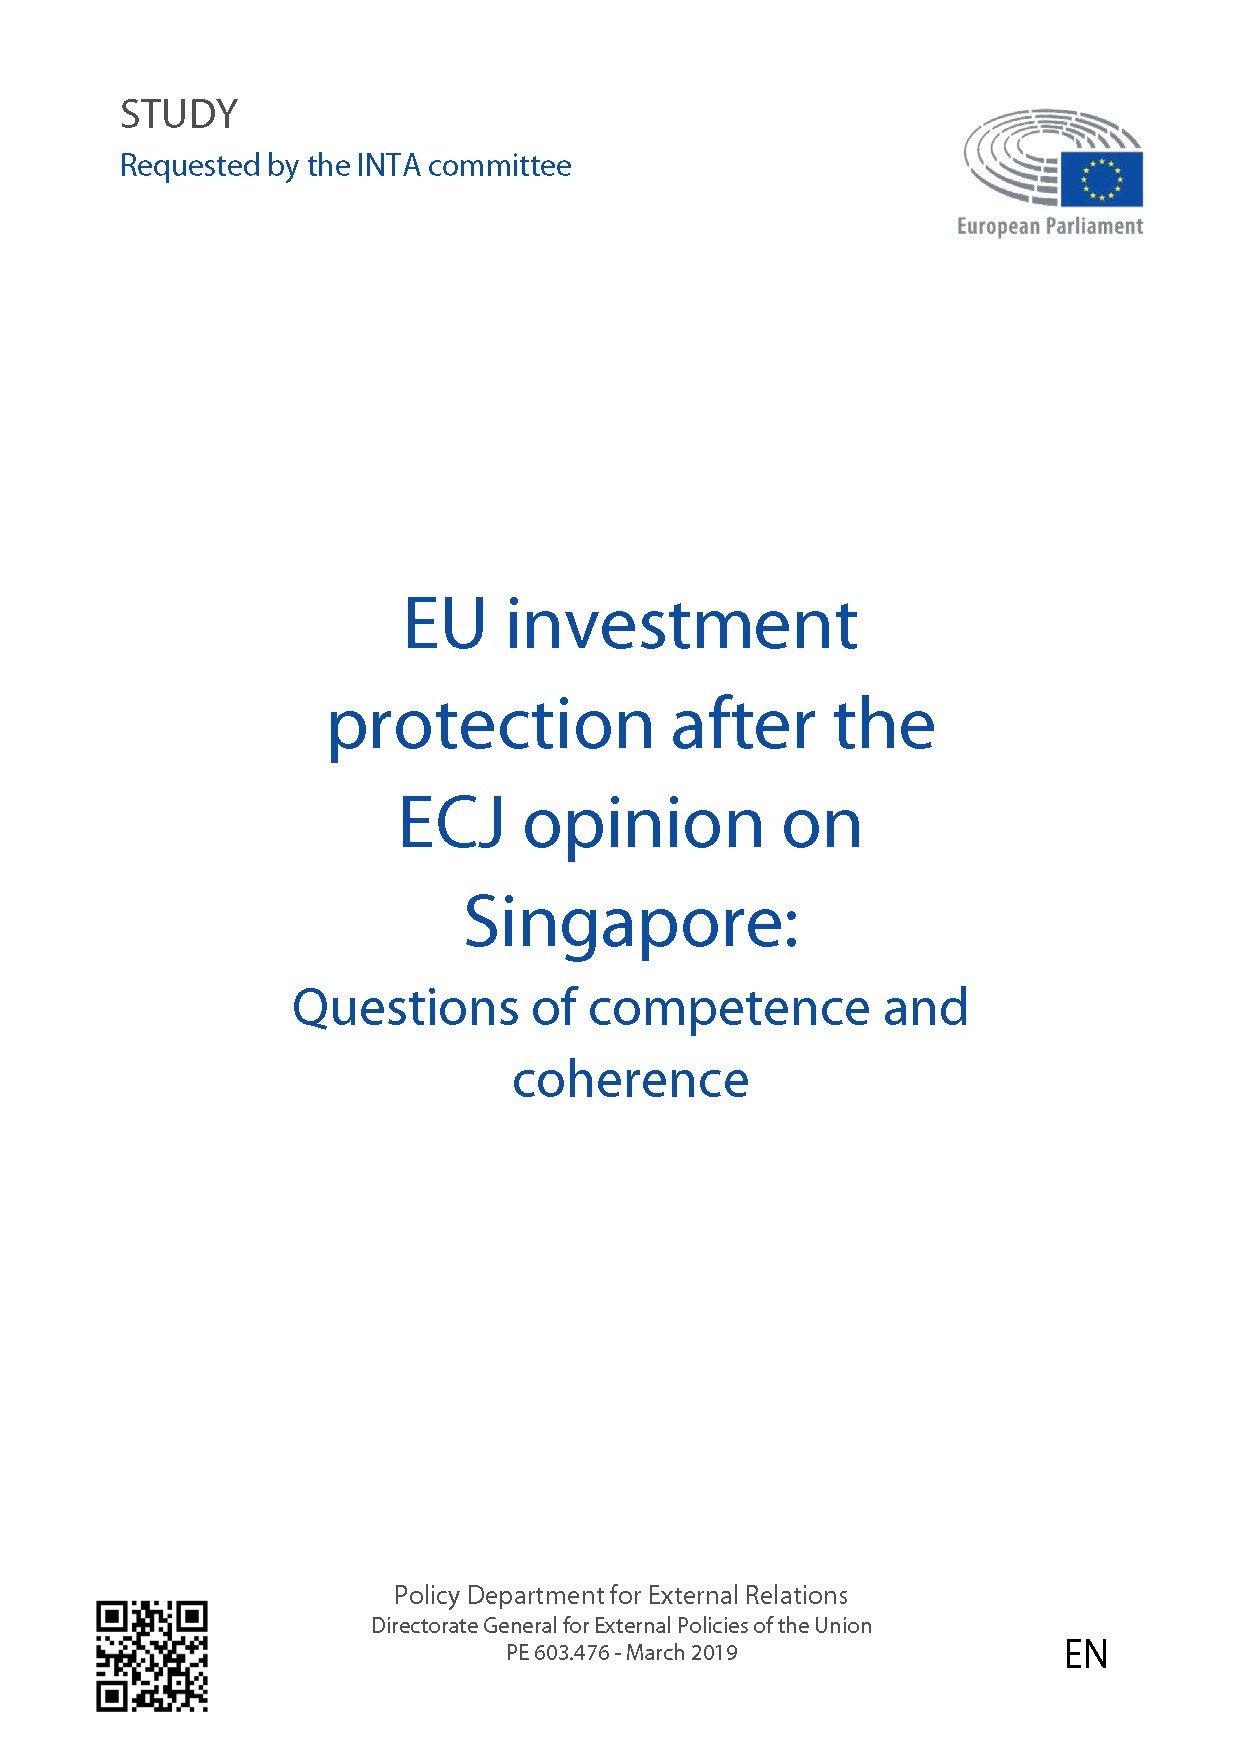 Stocktaking of investment protection provisions in EU agreements and Member States’ bilateral investment treaties and their impact on the coherence of EU policy